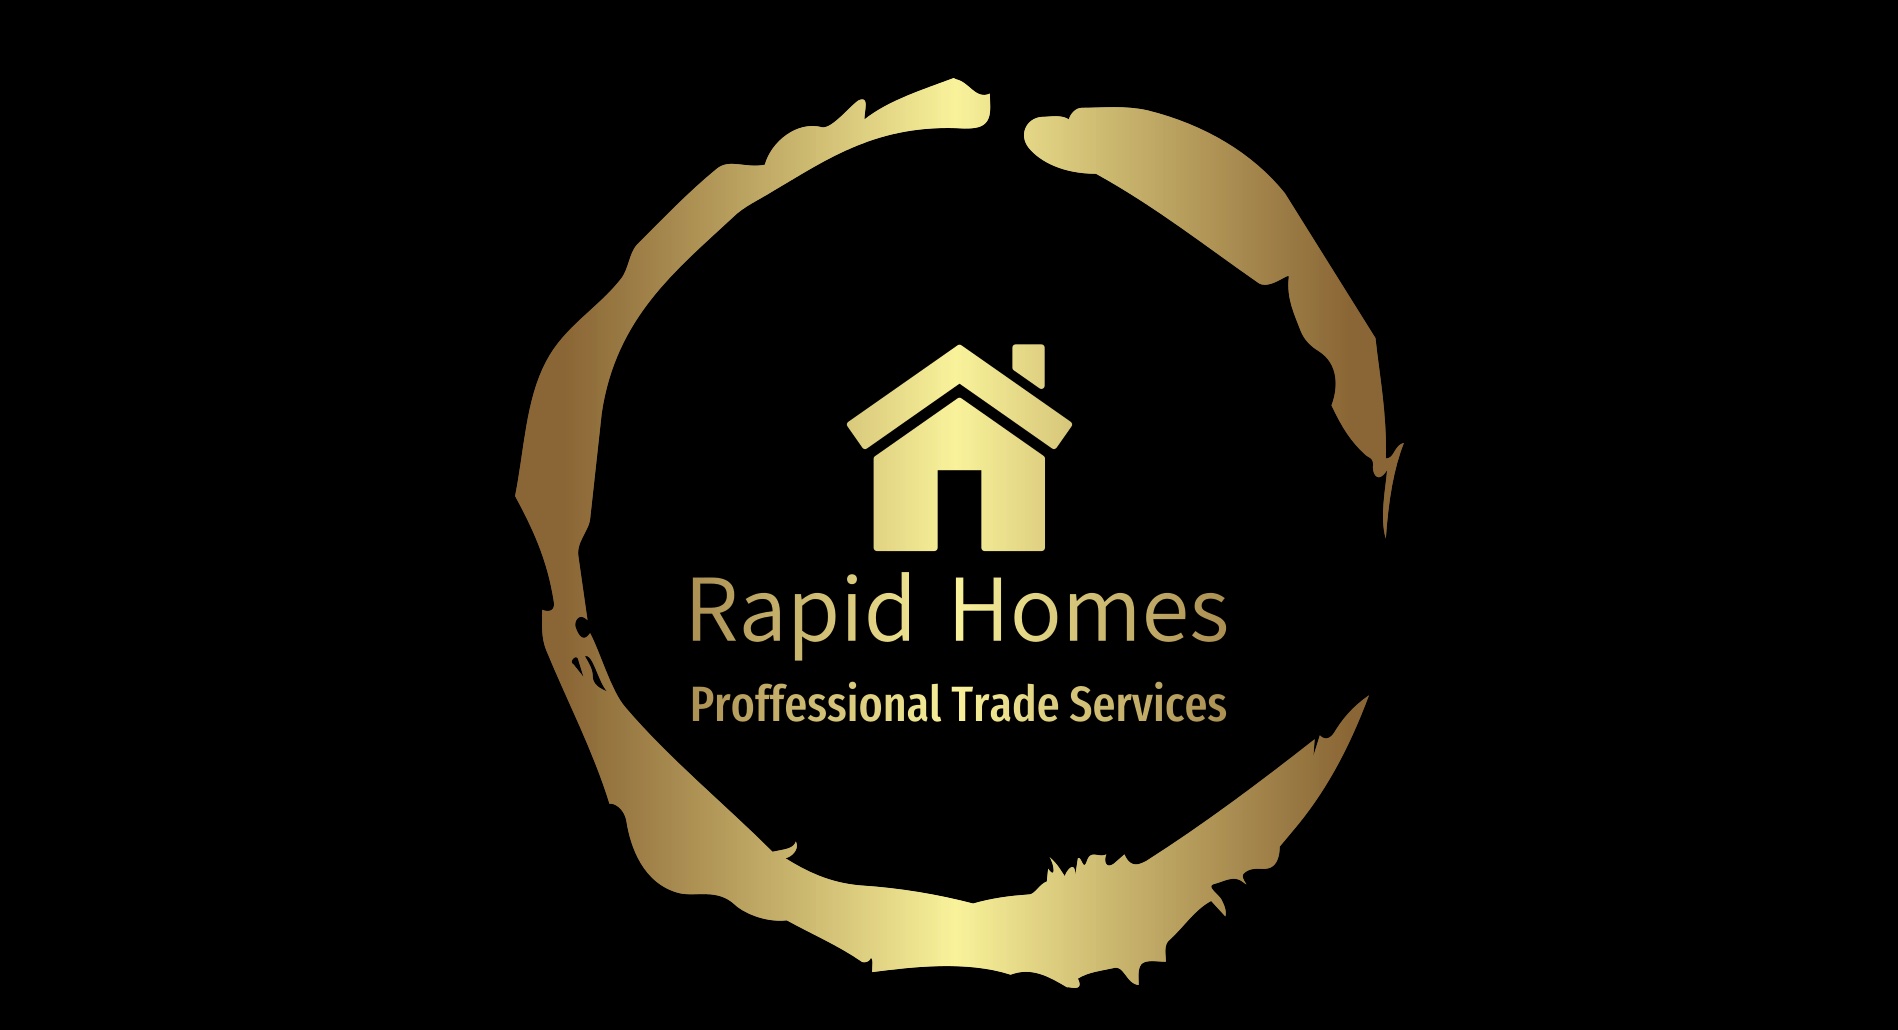 Rapid Homes-Professional Trade Services